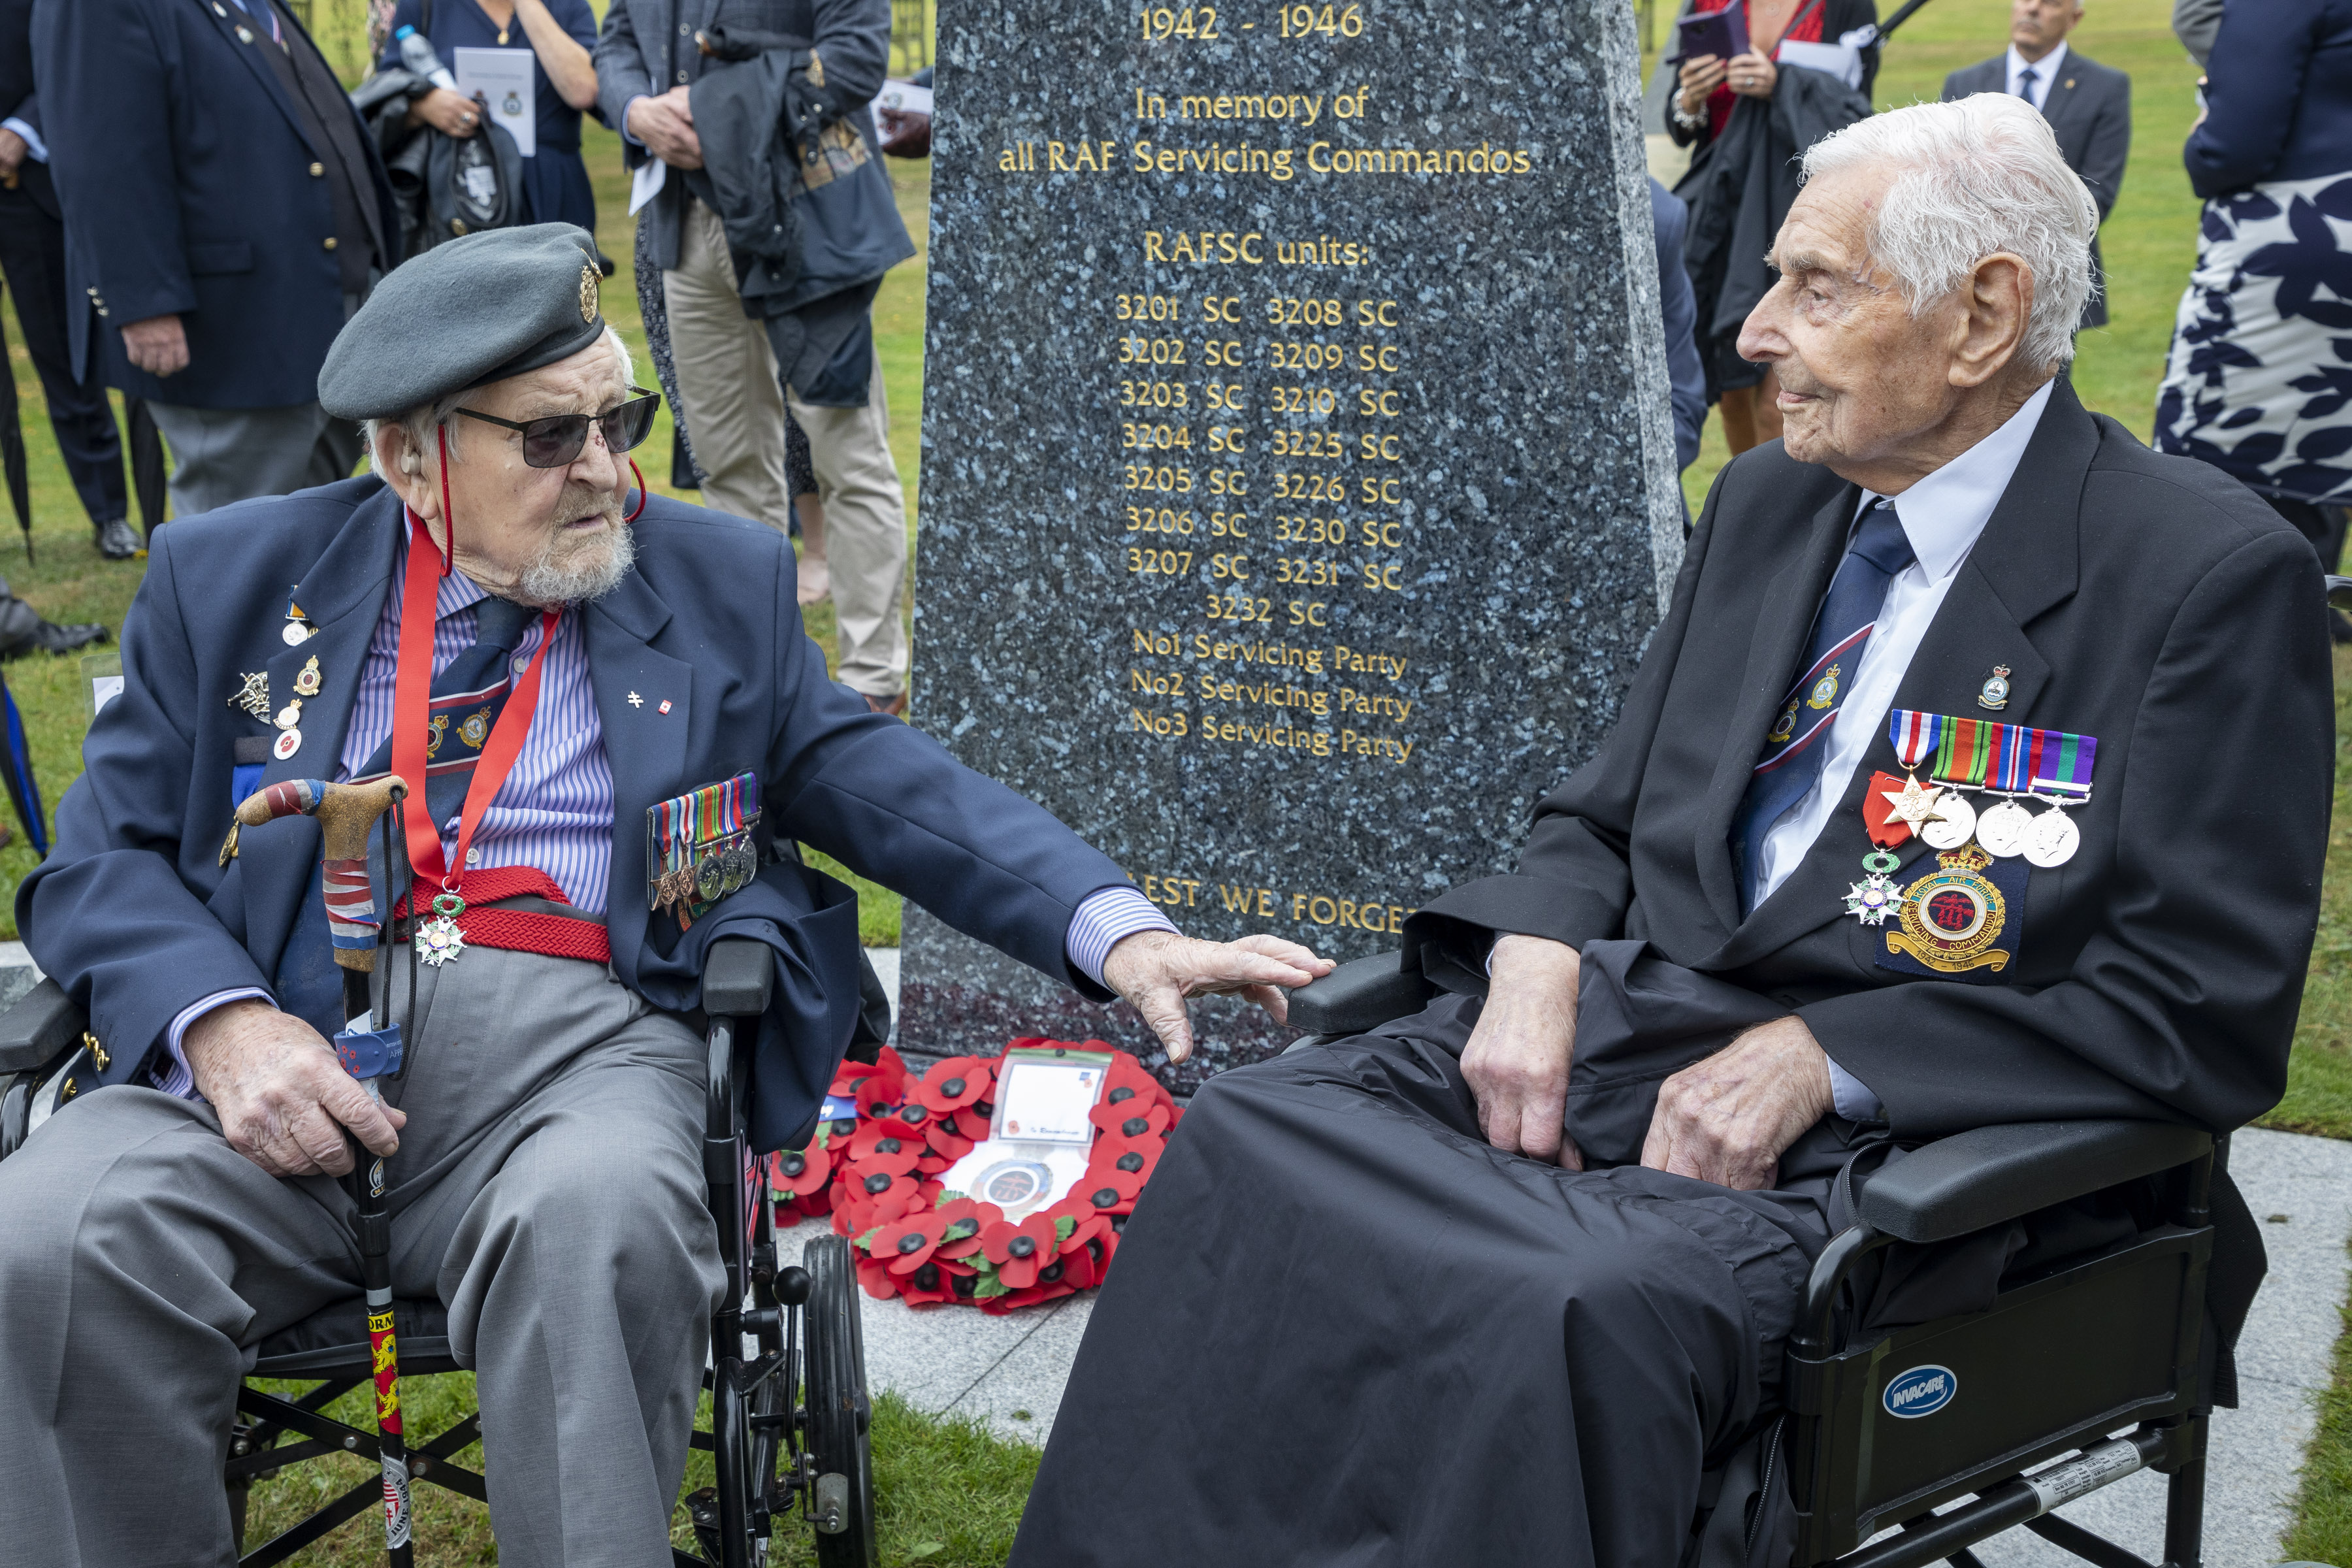 Two veterans in wheelchairs sit by memorial stone.